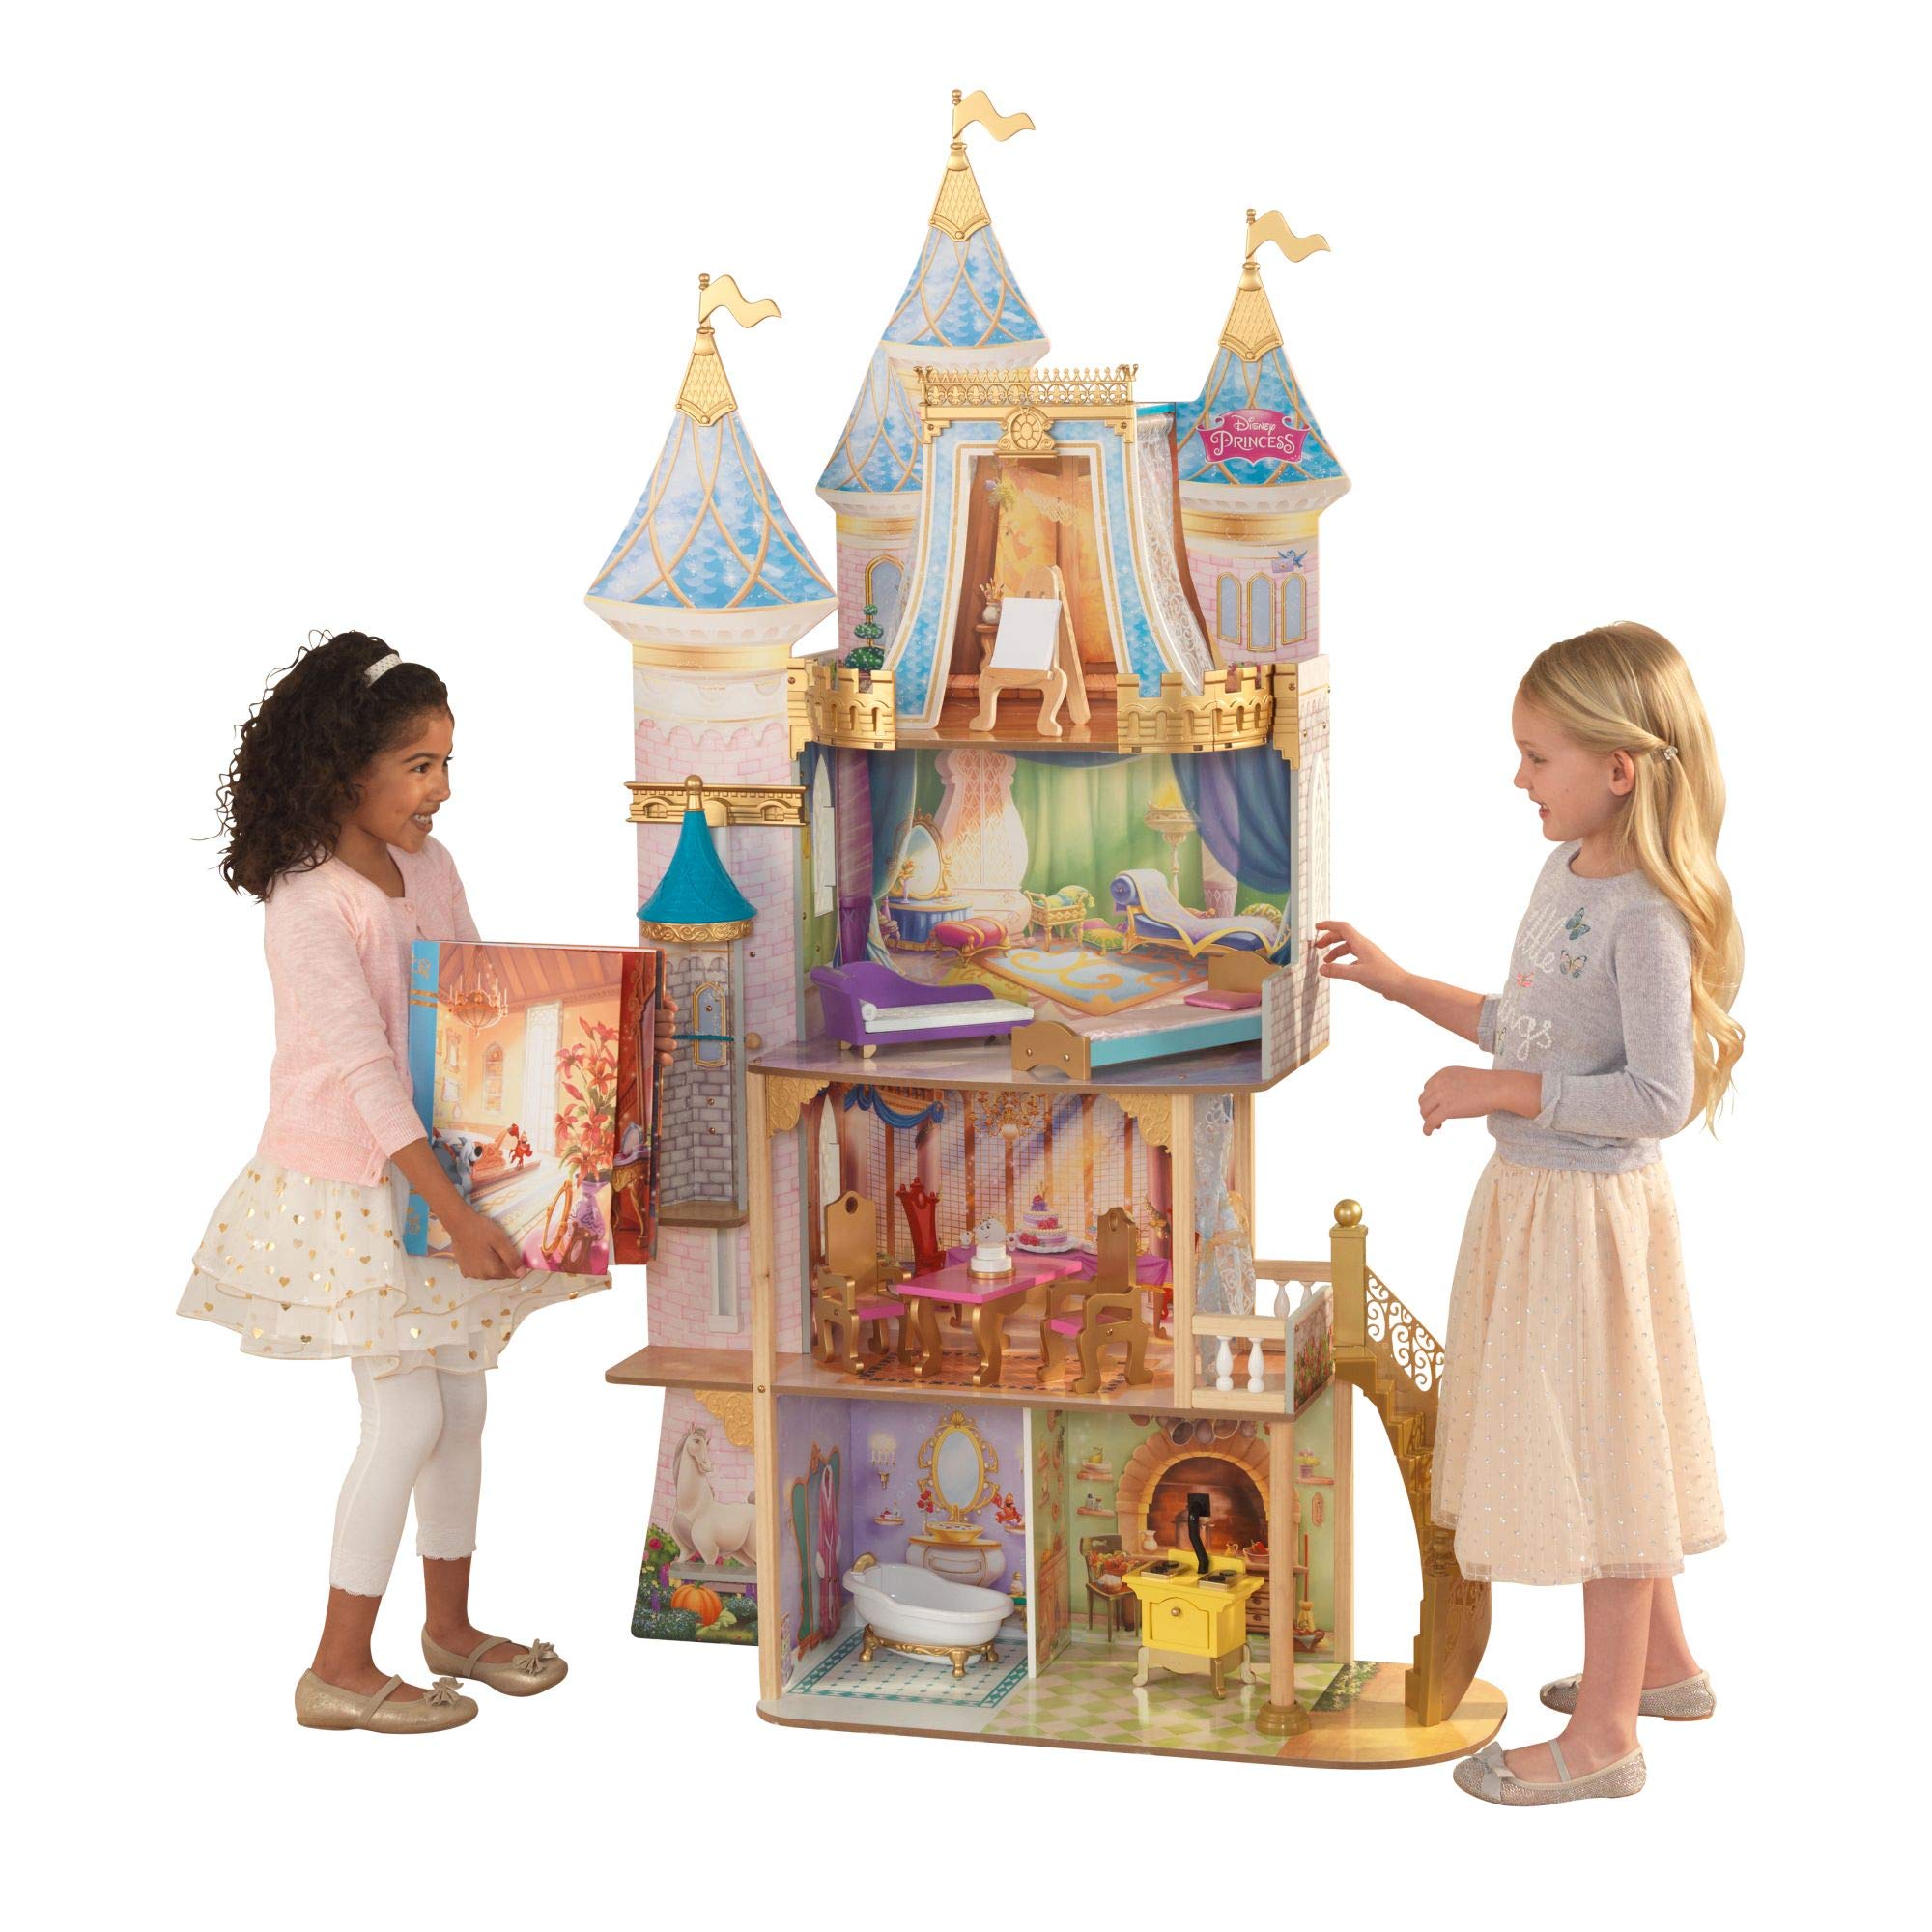 KidKraft Disney® Princess Royal Celebration Wooden Dollhouse with 10-Piece Accessories and Bonus Storybook Foldout Rooms, Gift for Ages 3+, includes hardware